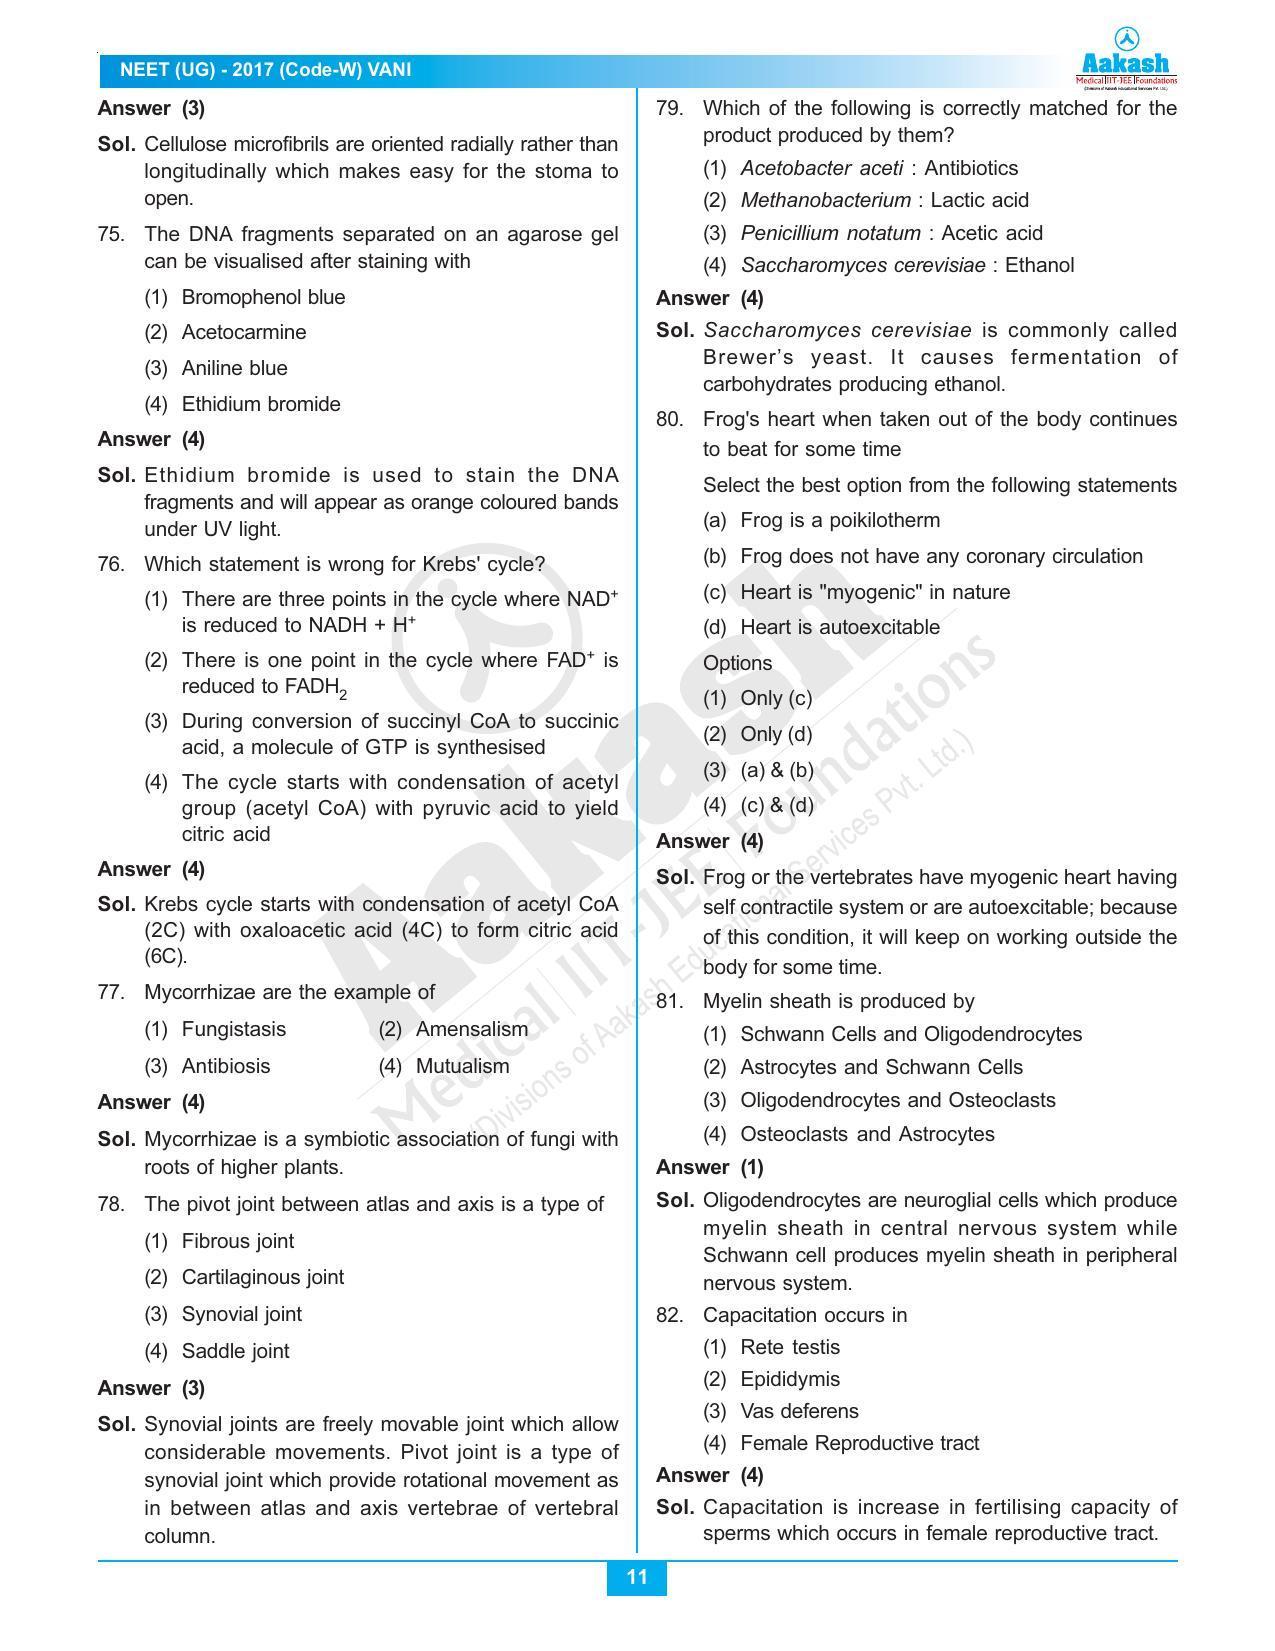  NEET Code W 2017 Answer & Solutions - Page 11